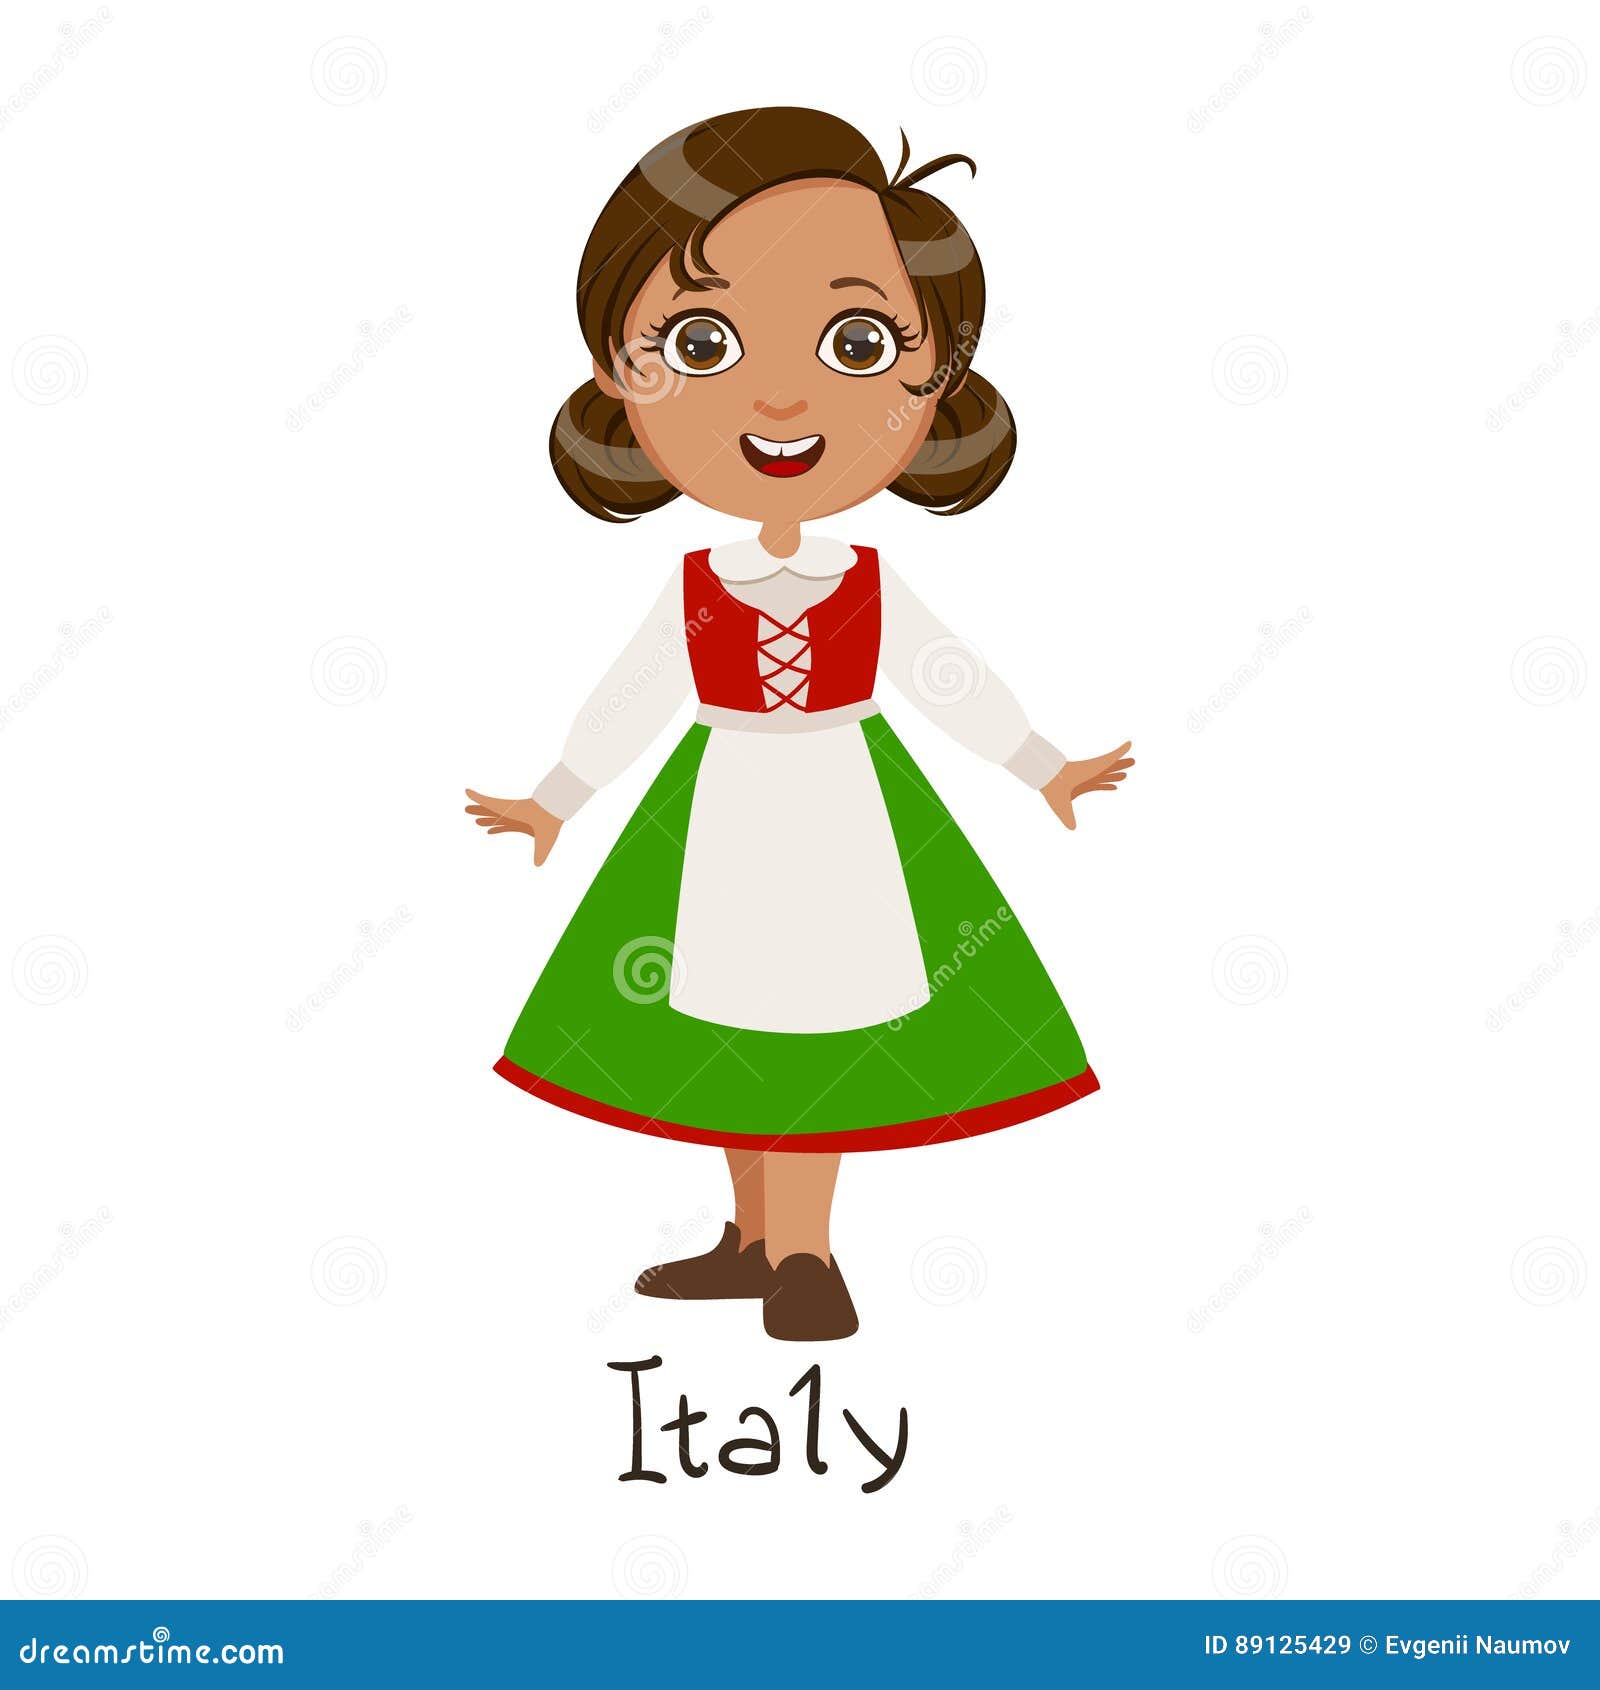 https://thumbs.dreamstime.com/z/girl-italy-country-national-clothes-wearing-green-skirt-apron-traditional-nation-kid-italian-costume-89125429.jpg